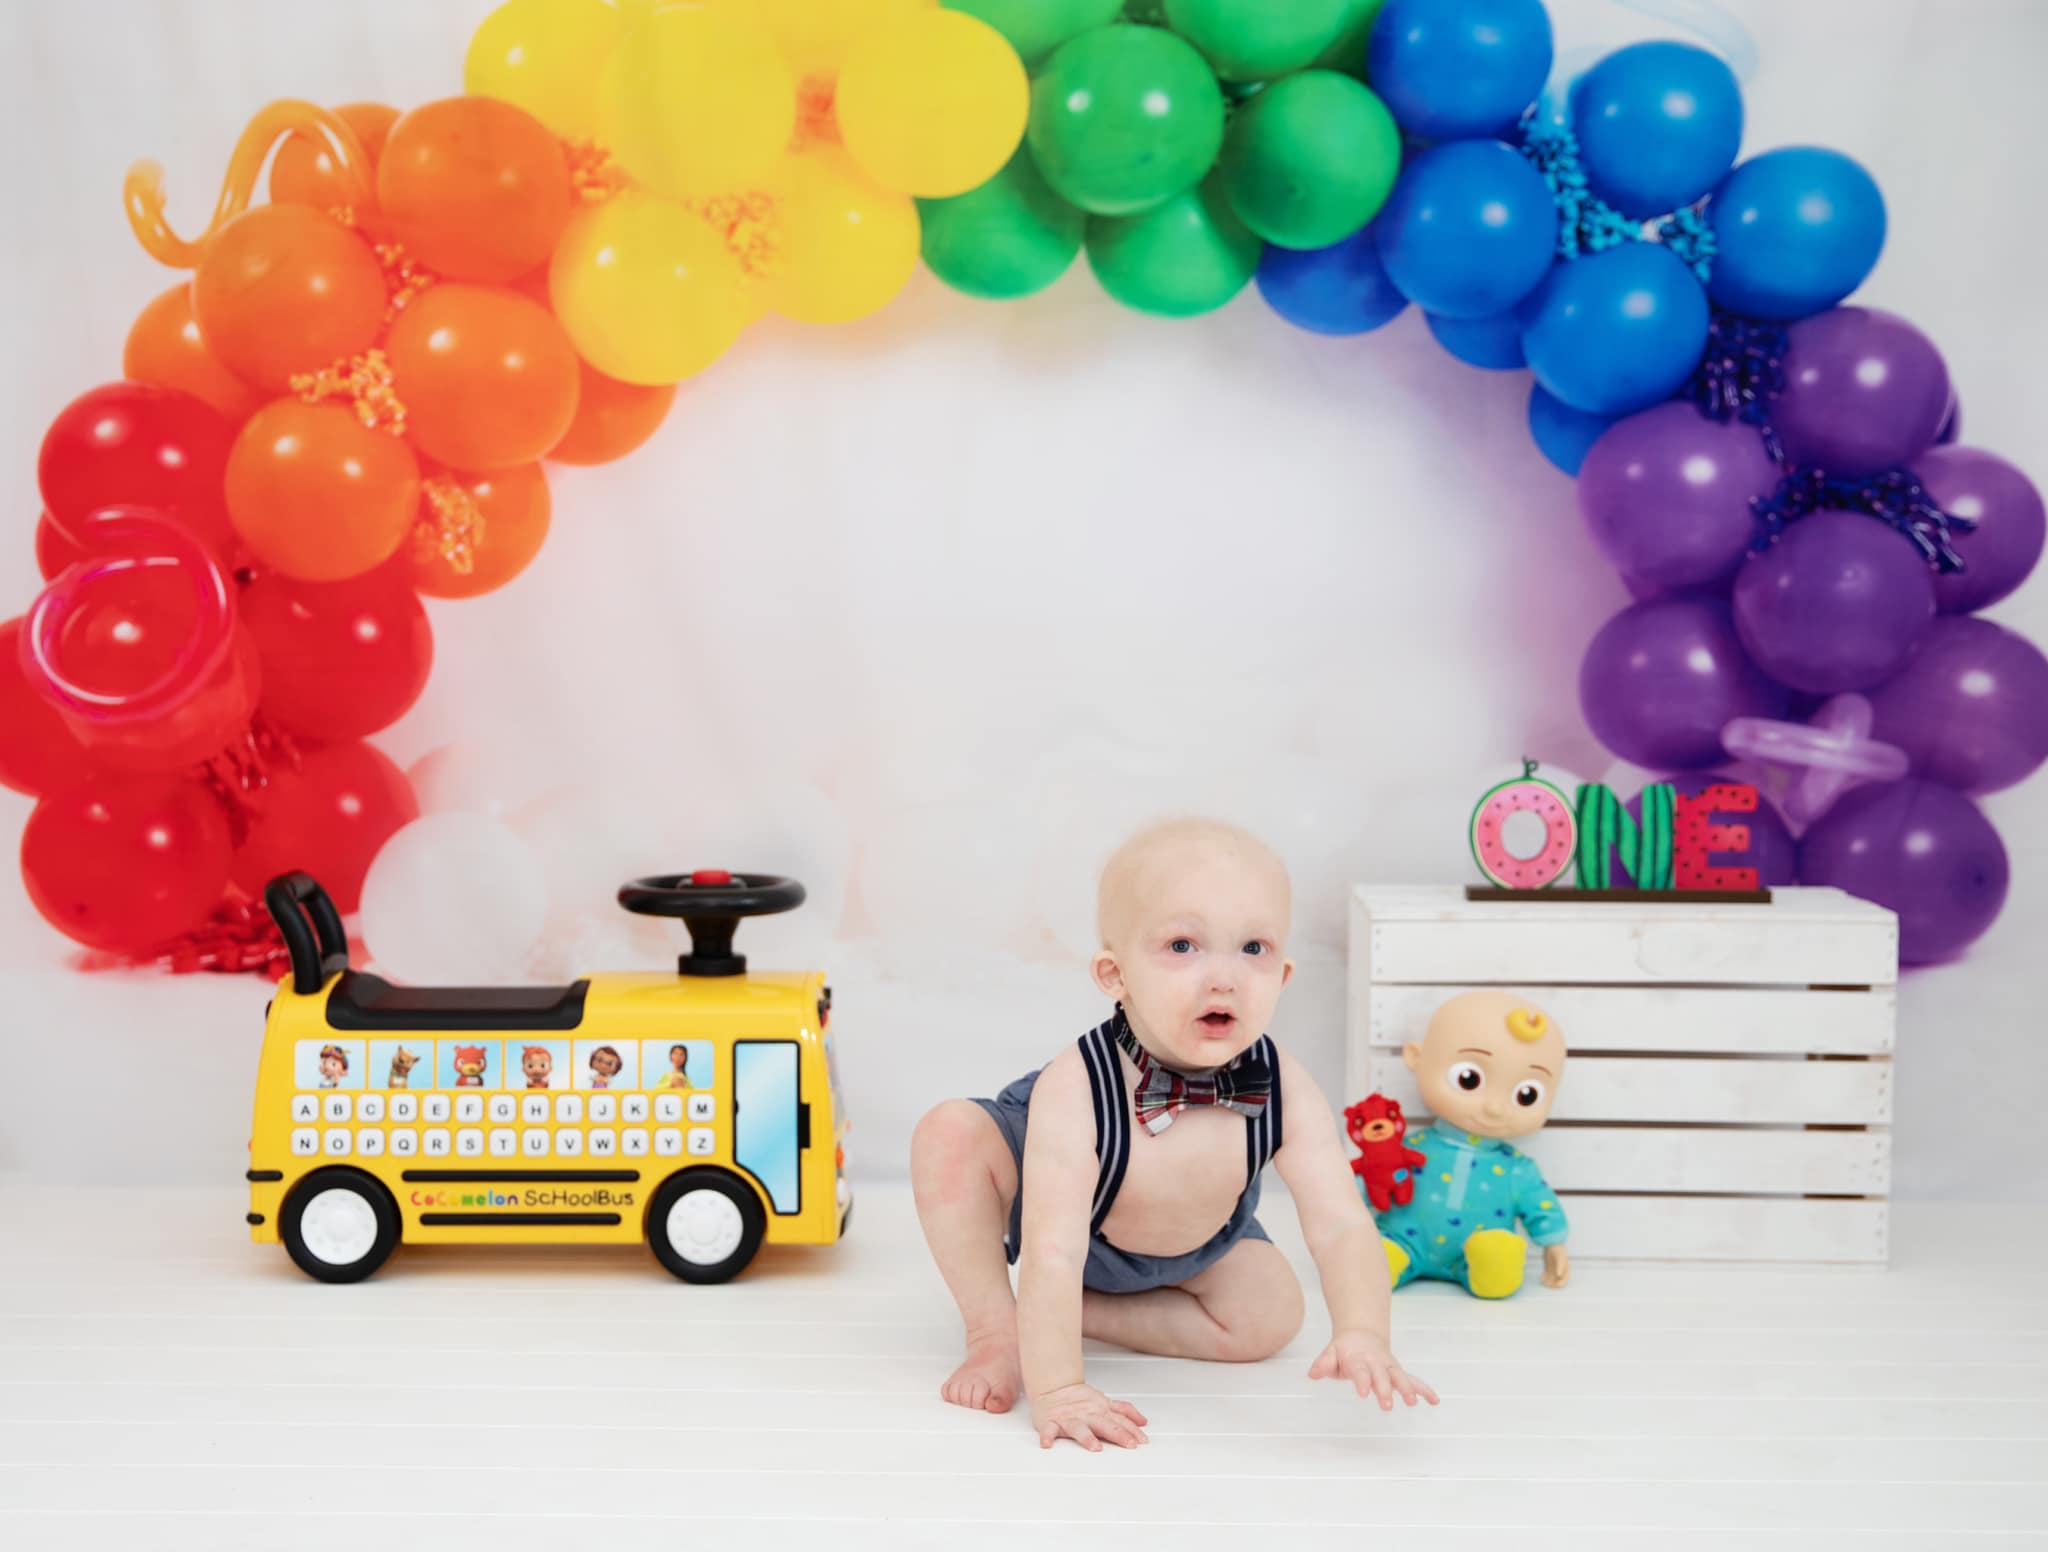 Kate Rainbow Balloon Arch Backdrop Designed by Chrissie Green